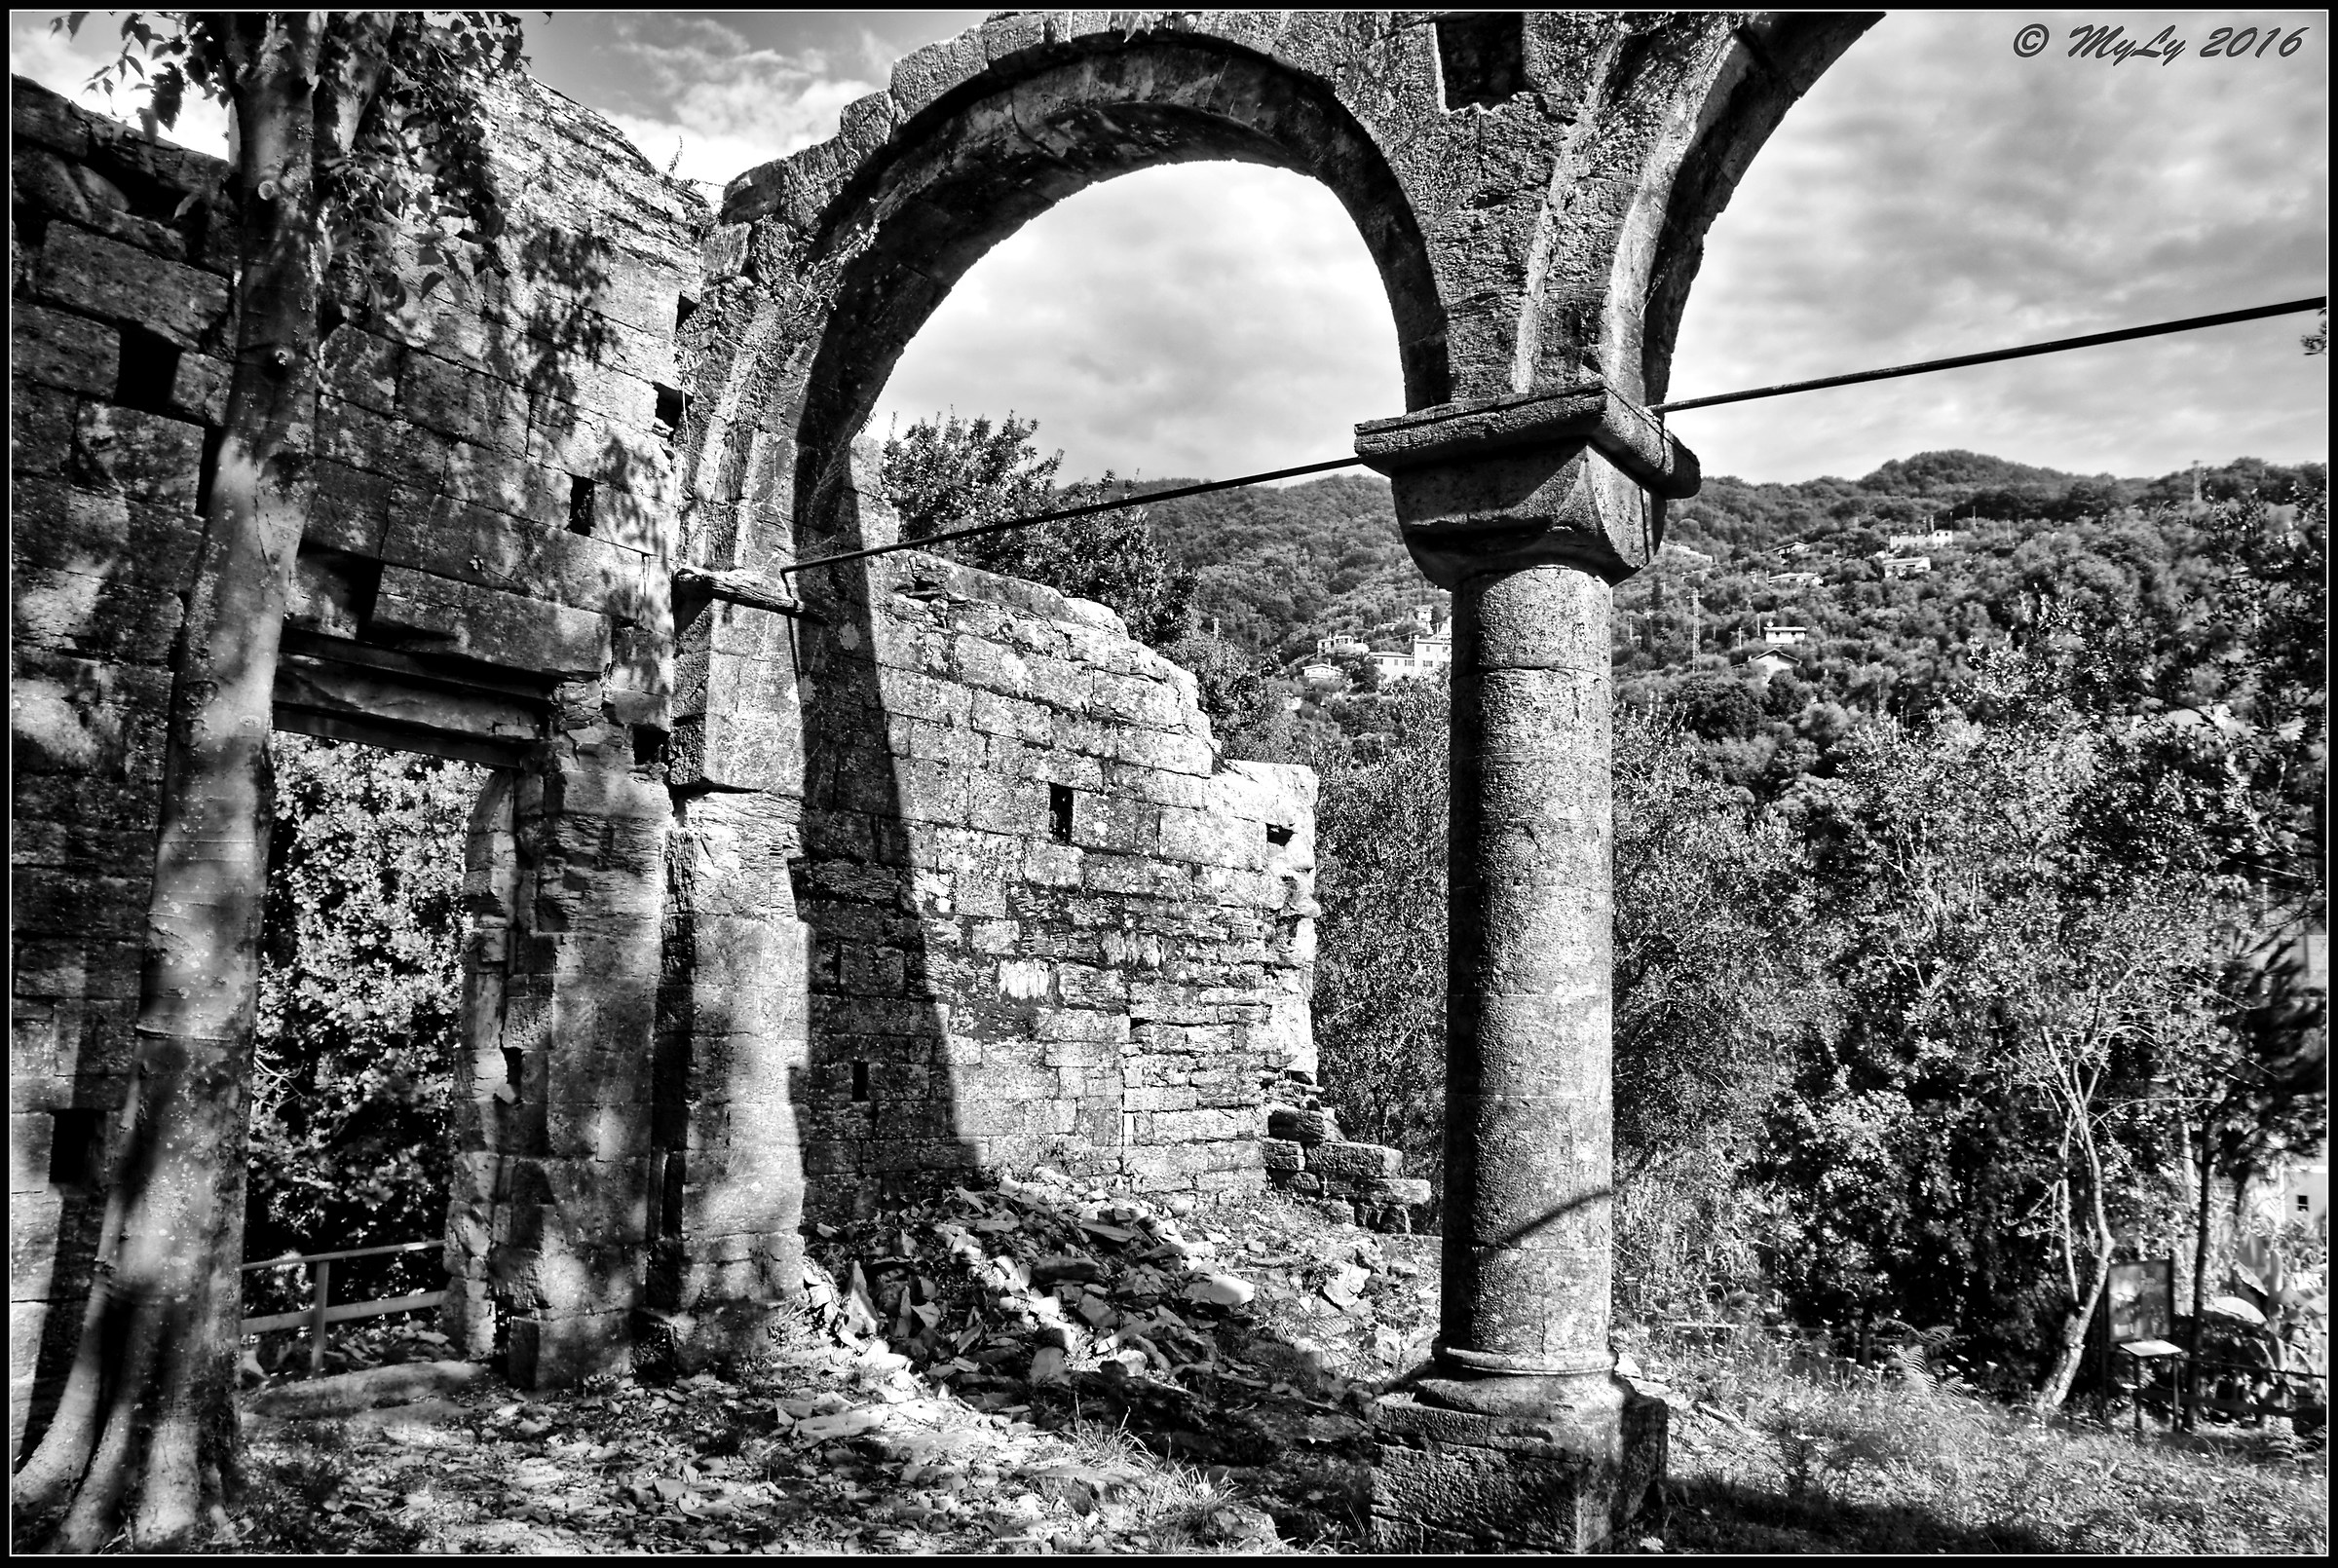 Inside the ruins...